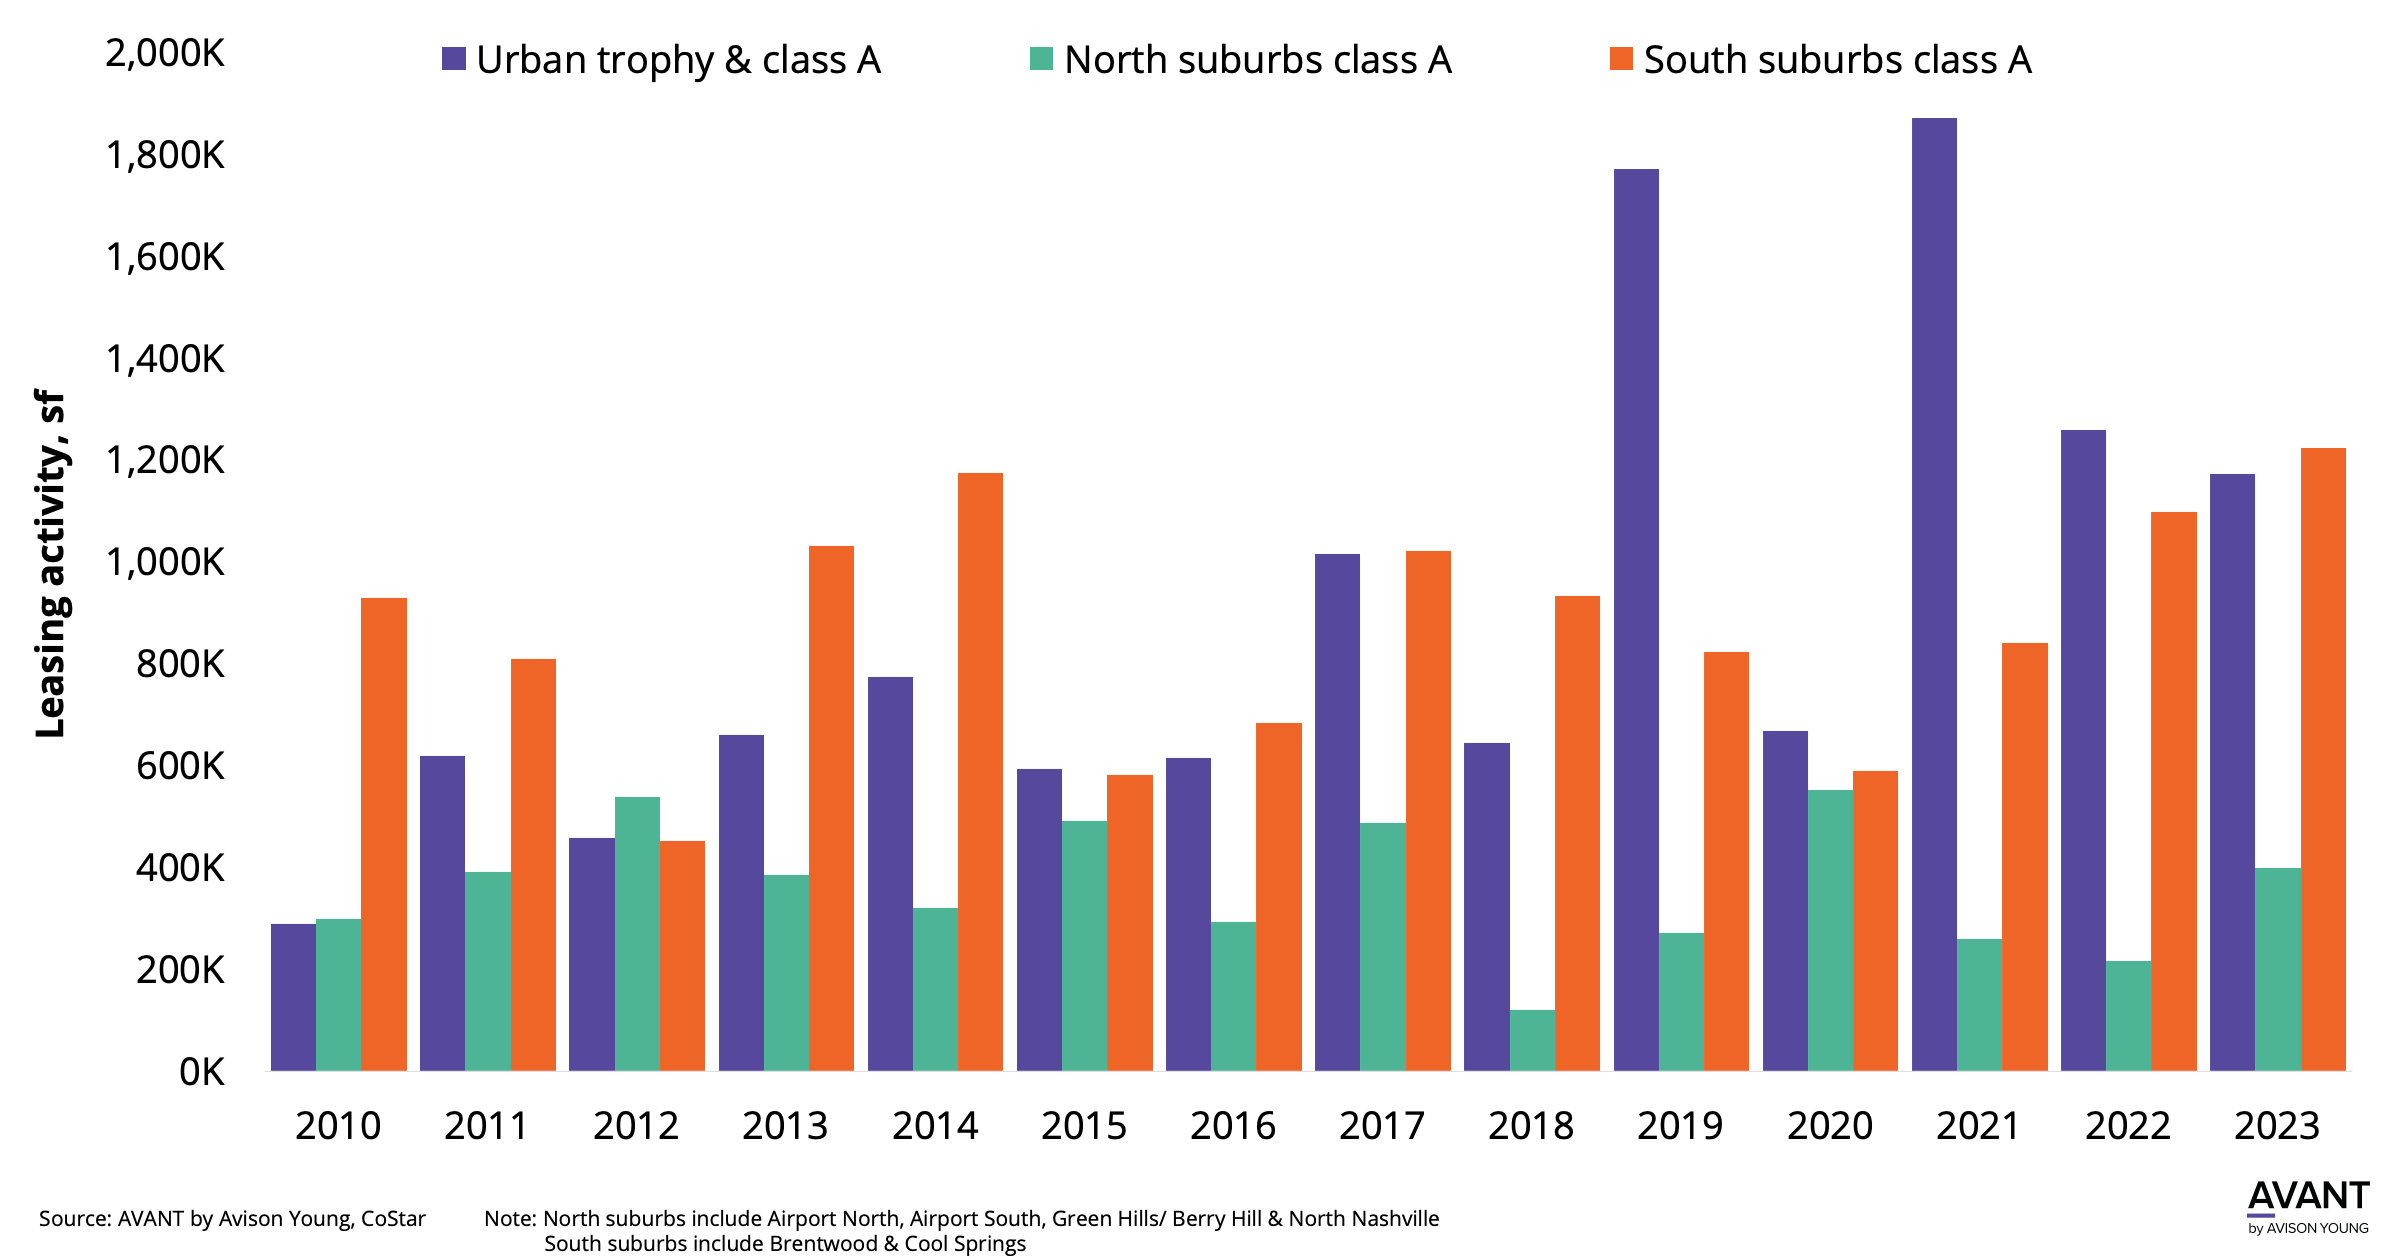 Graph of class A leasing activity in Nashville's urban, north suburbs and south suburbs